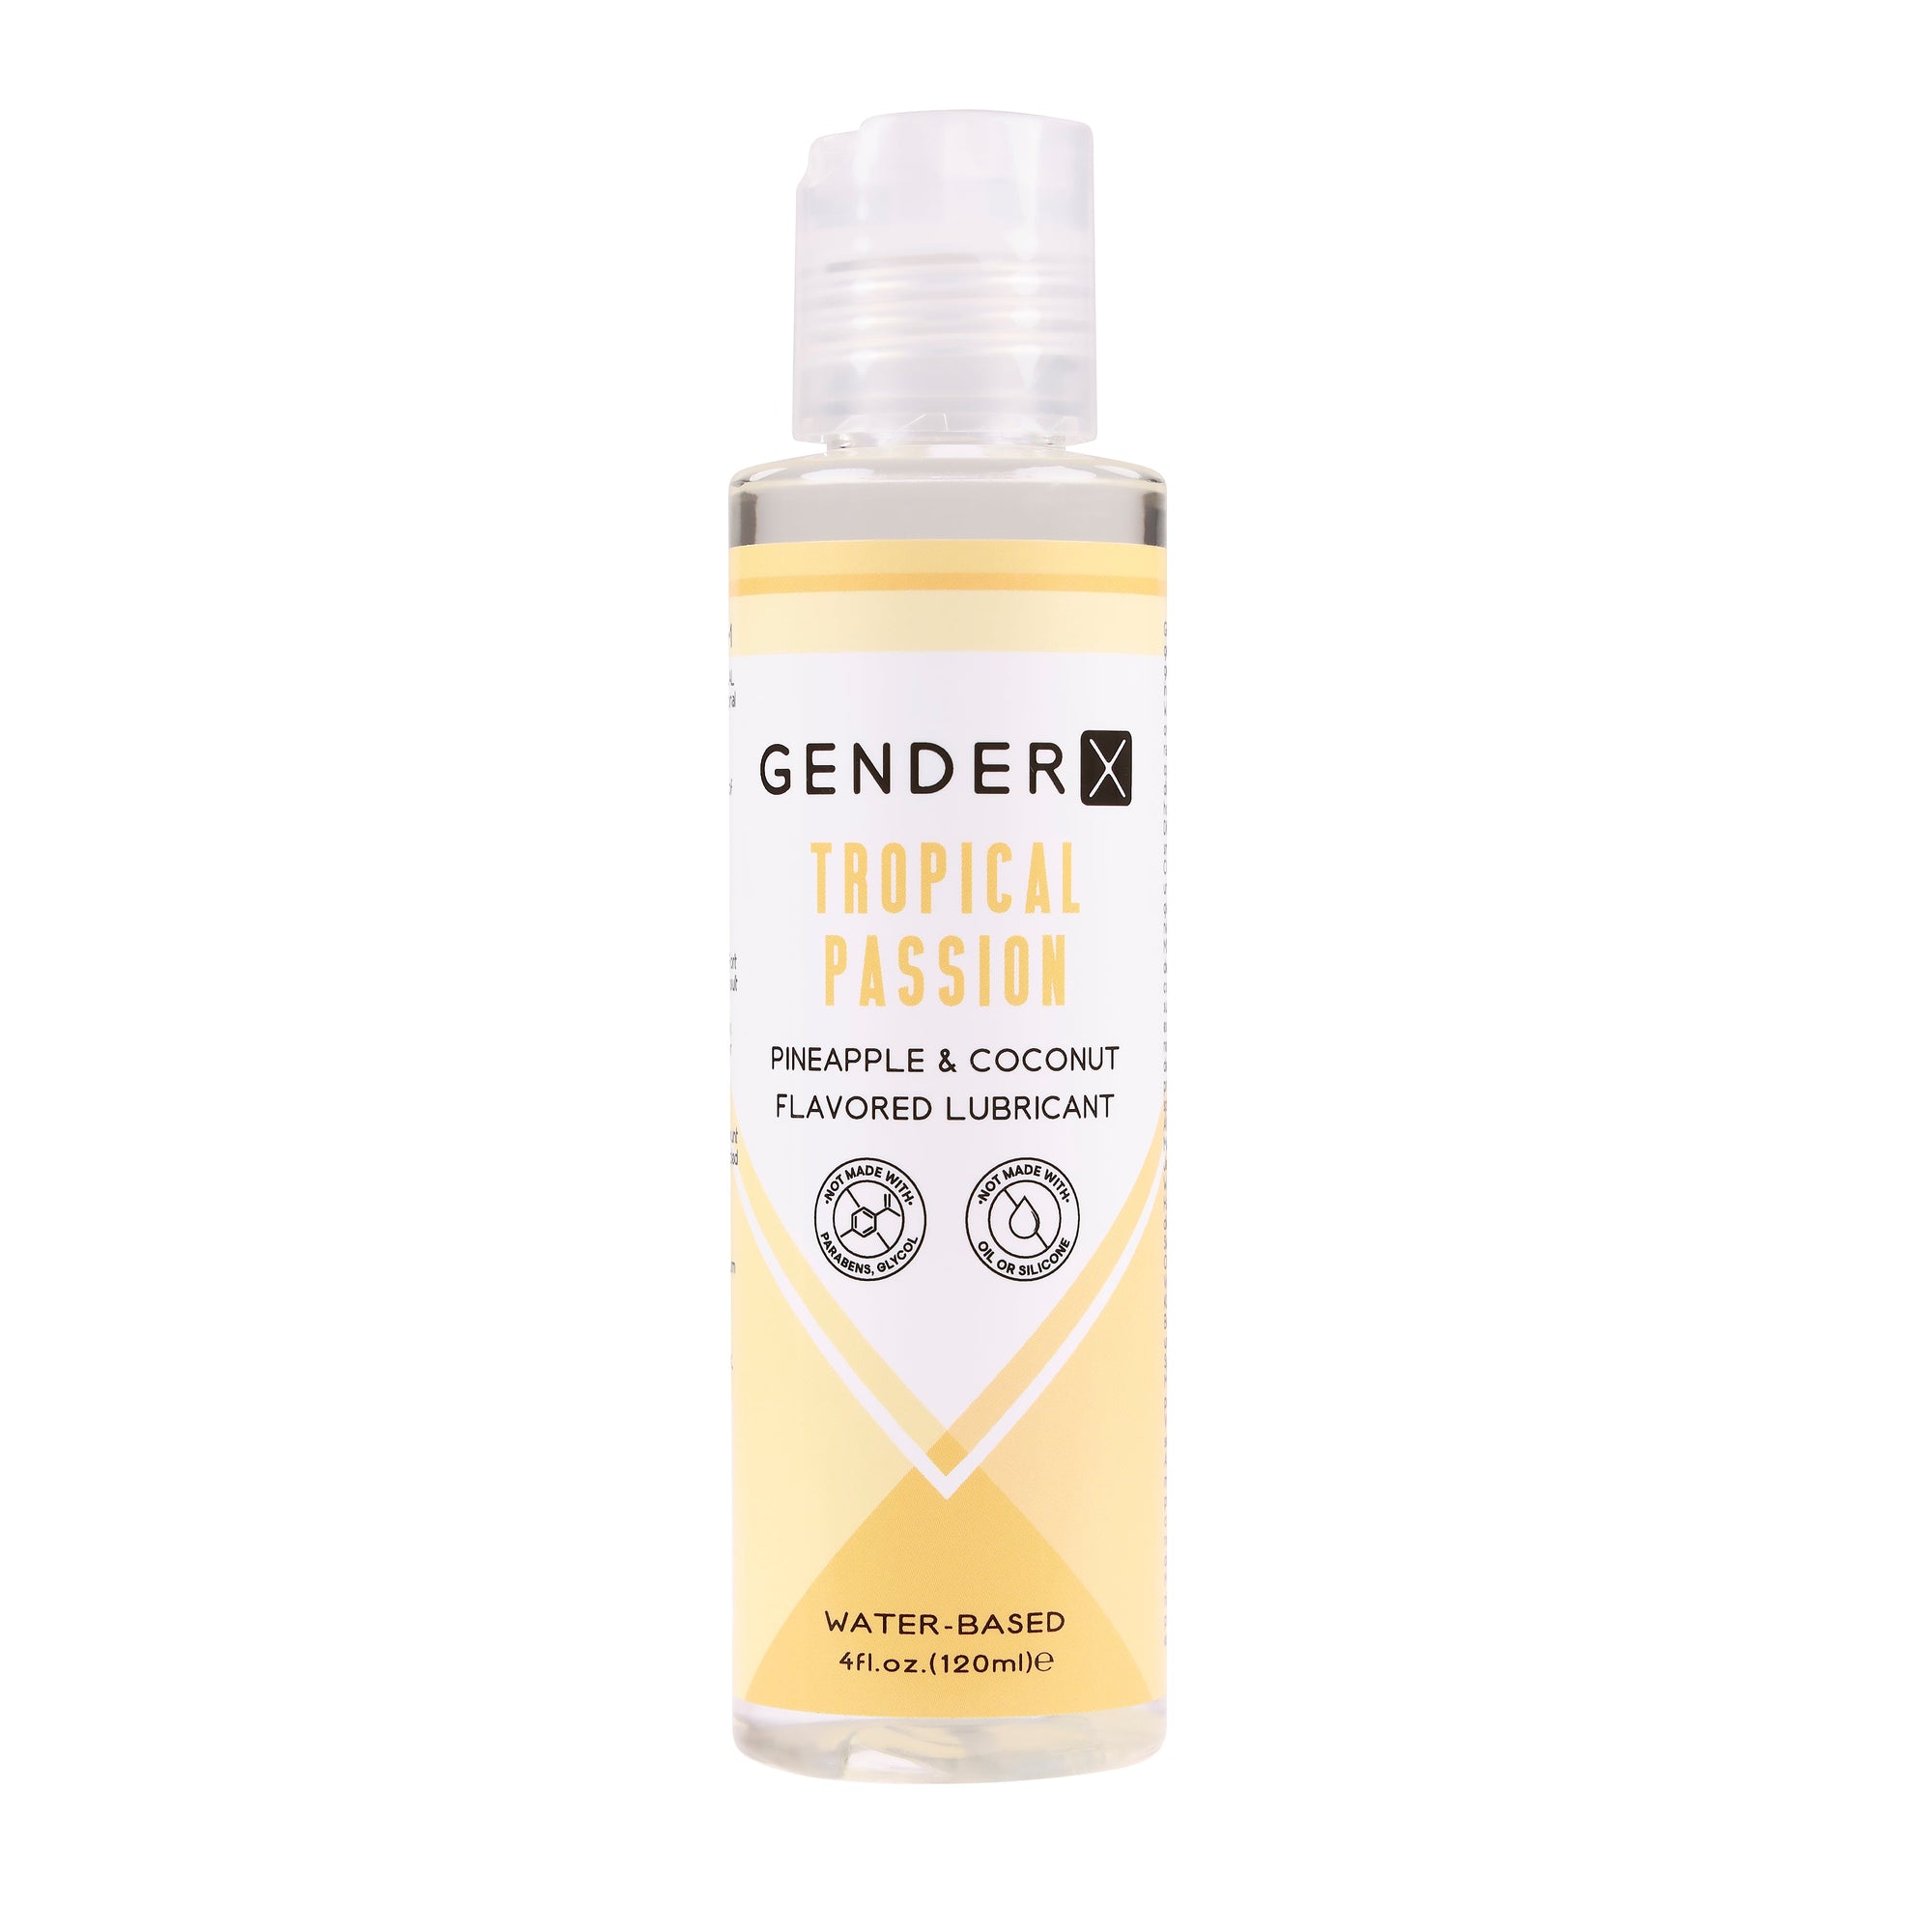 Evolved - Gender X Tropical Passion Pineapple and Coconut Flavored Lube